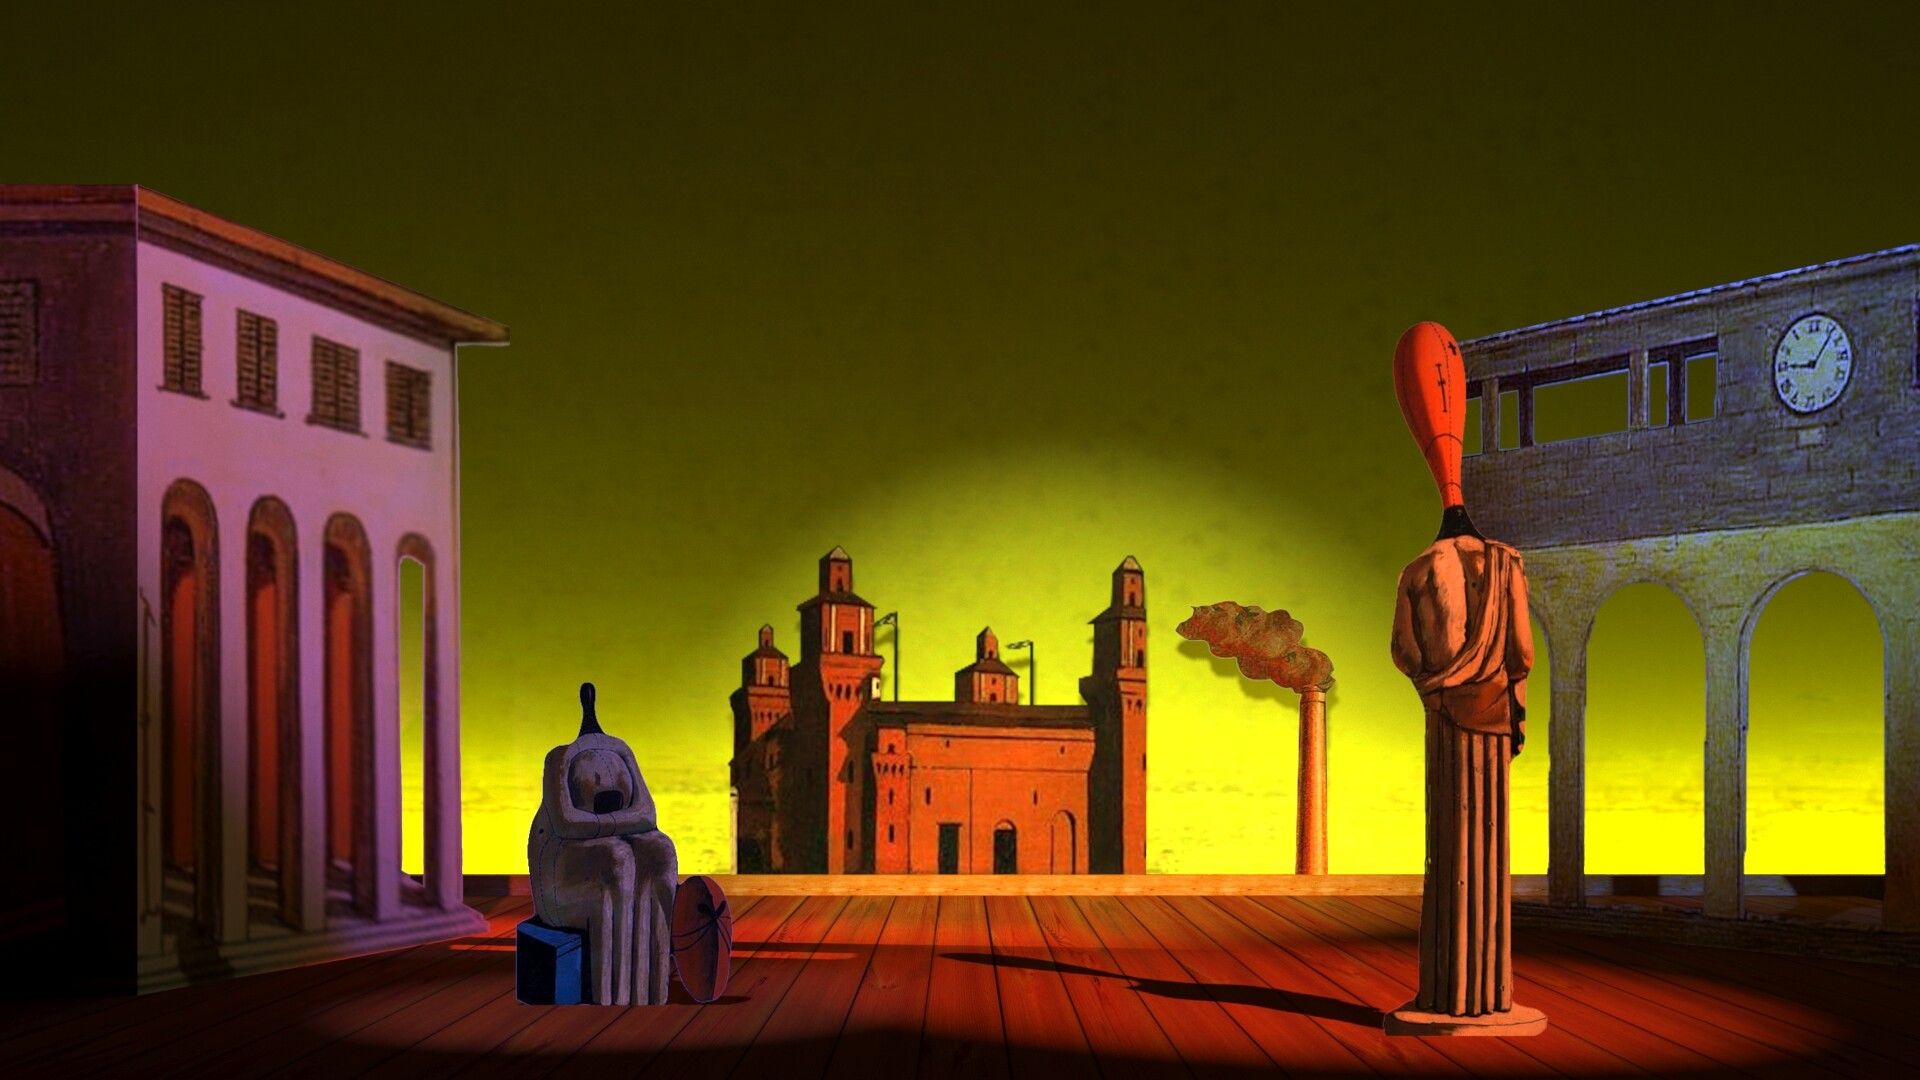 Theater Stage Design (Inspired from Giorgio De Chirico Metaphysical Paintings), Zyad Fathy